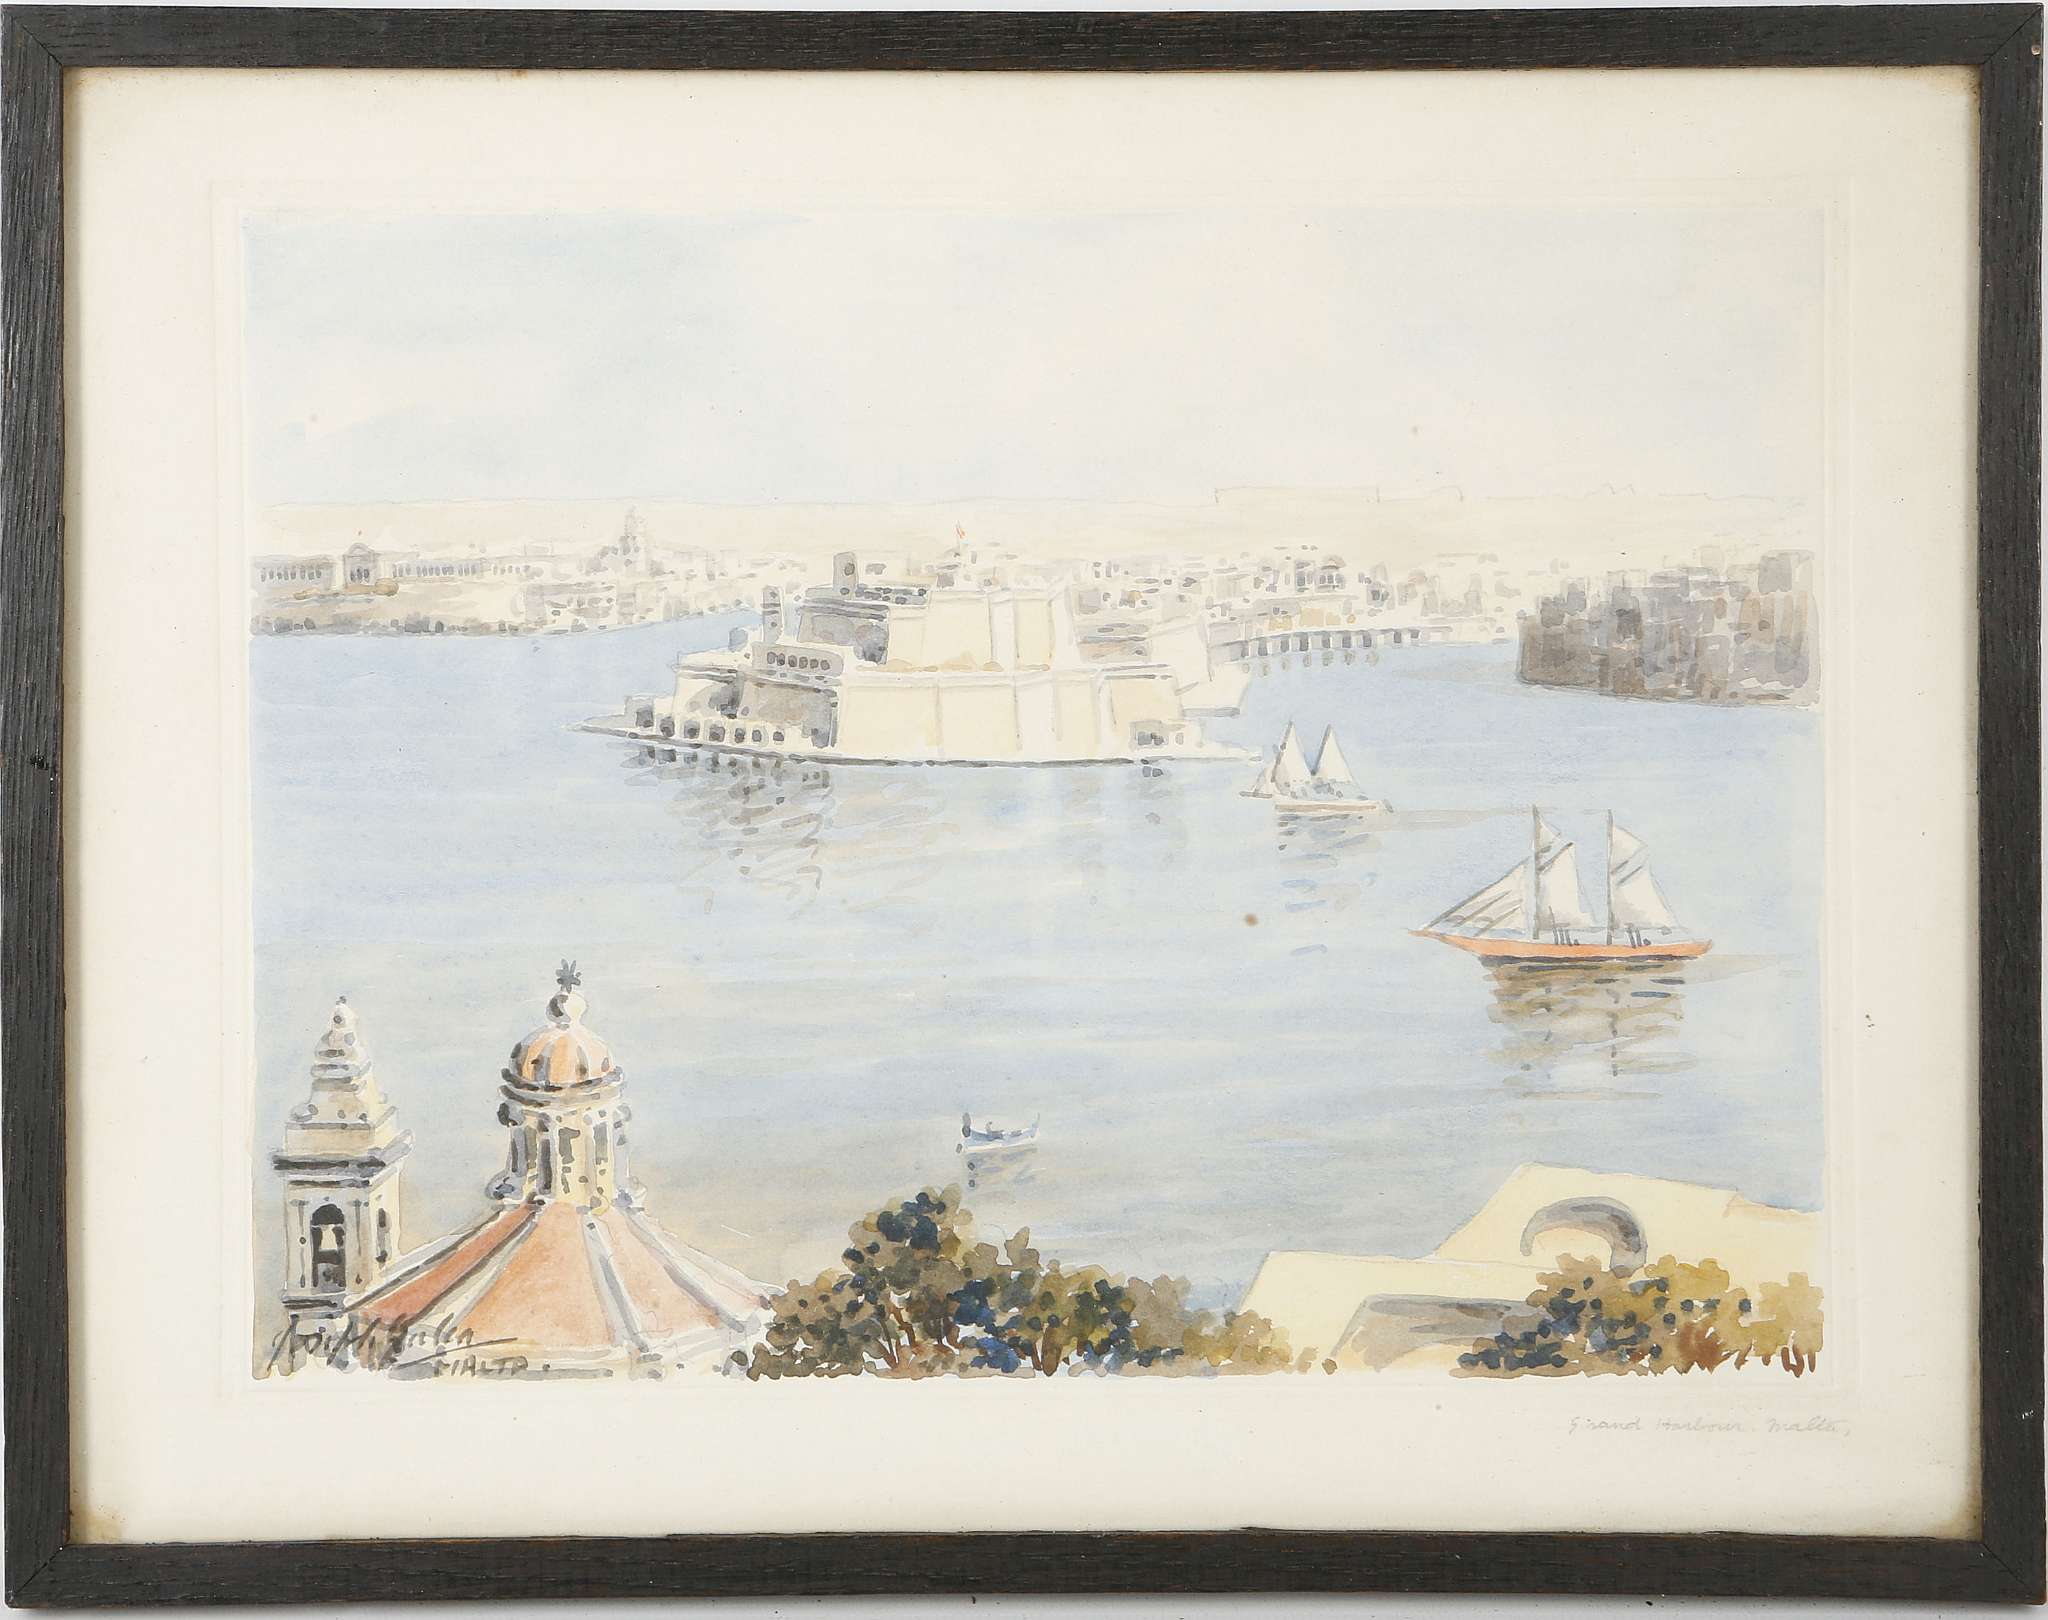 Galia, three 20th century Maltese view watercolours of Medina and the Grand Harbour, all signee to - Image 5 of 6